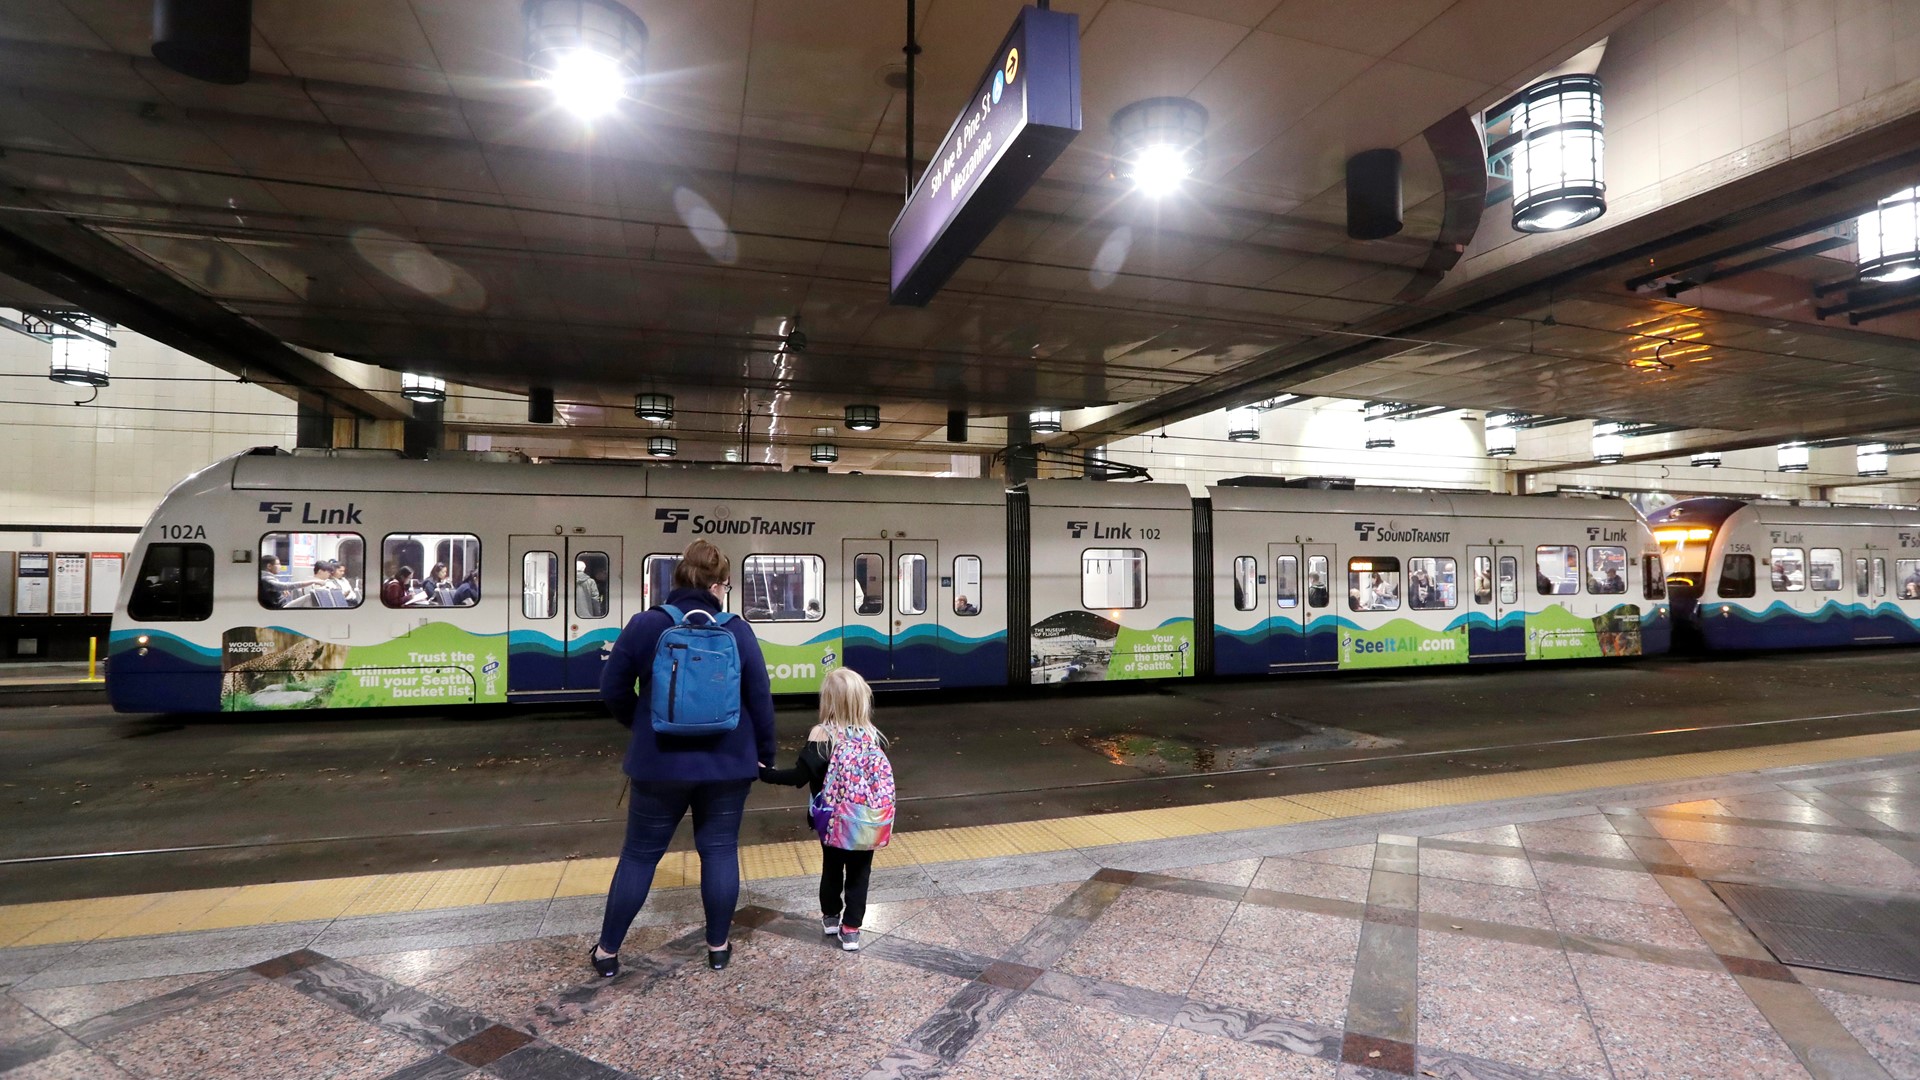 The Washington State Supreme Court ruled Thursday that Sound Transit’s method for determining car values is constitutional.